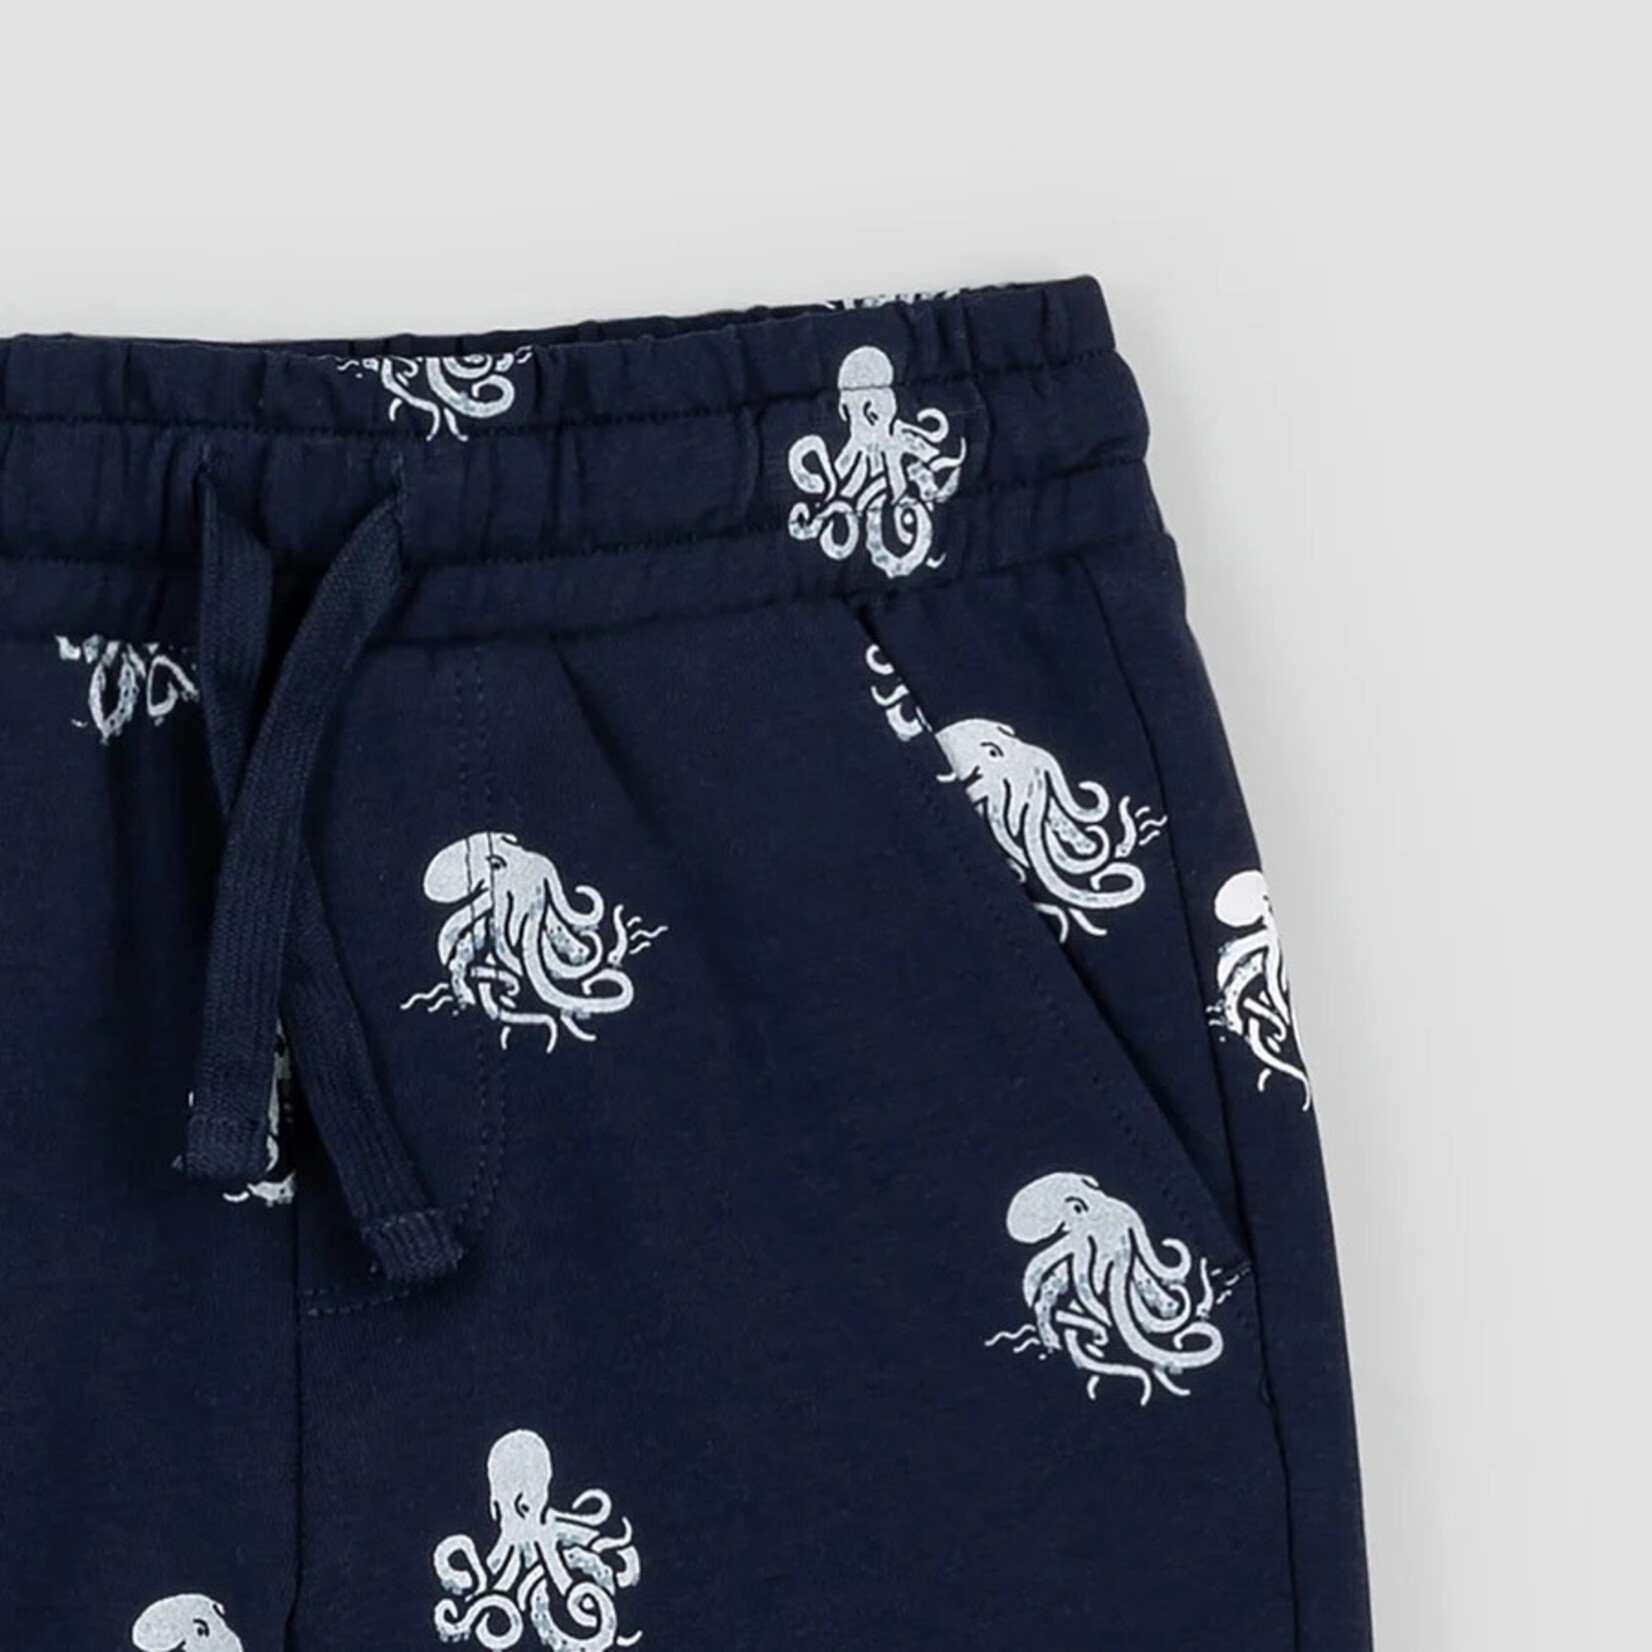 Miles the label MILES THE LABEL - Kraken Print on Navy Terry Shorts